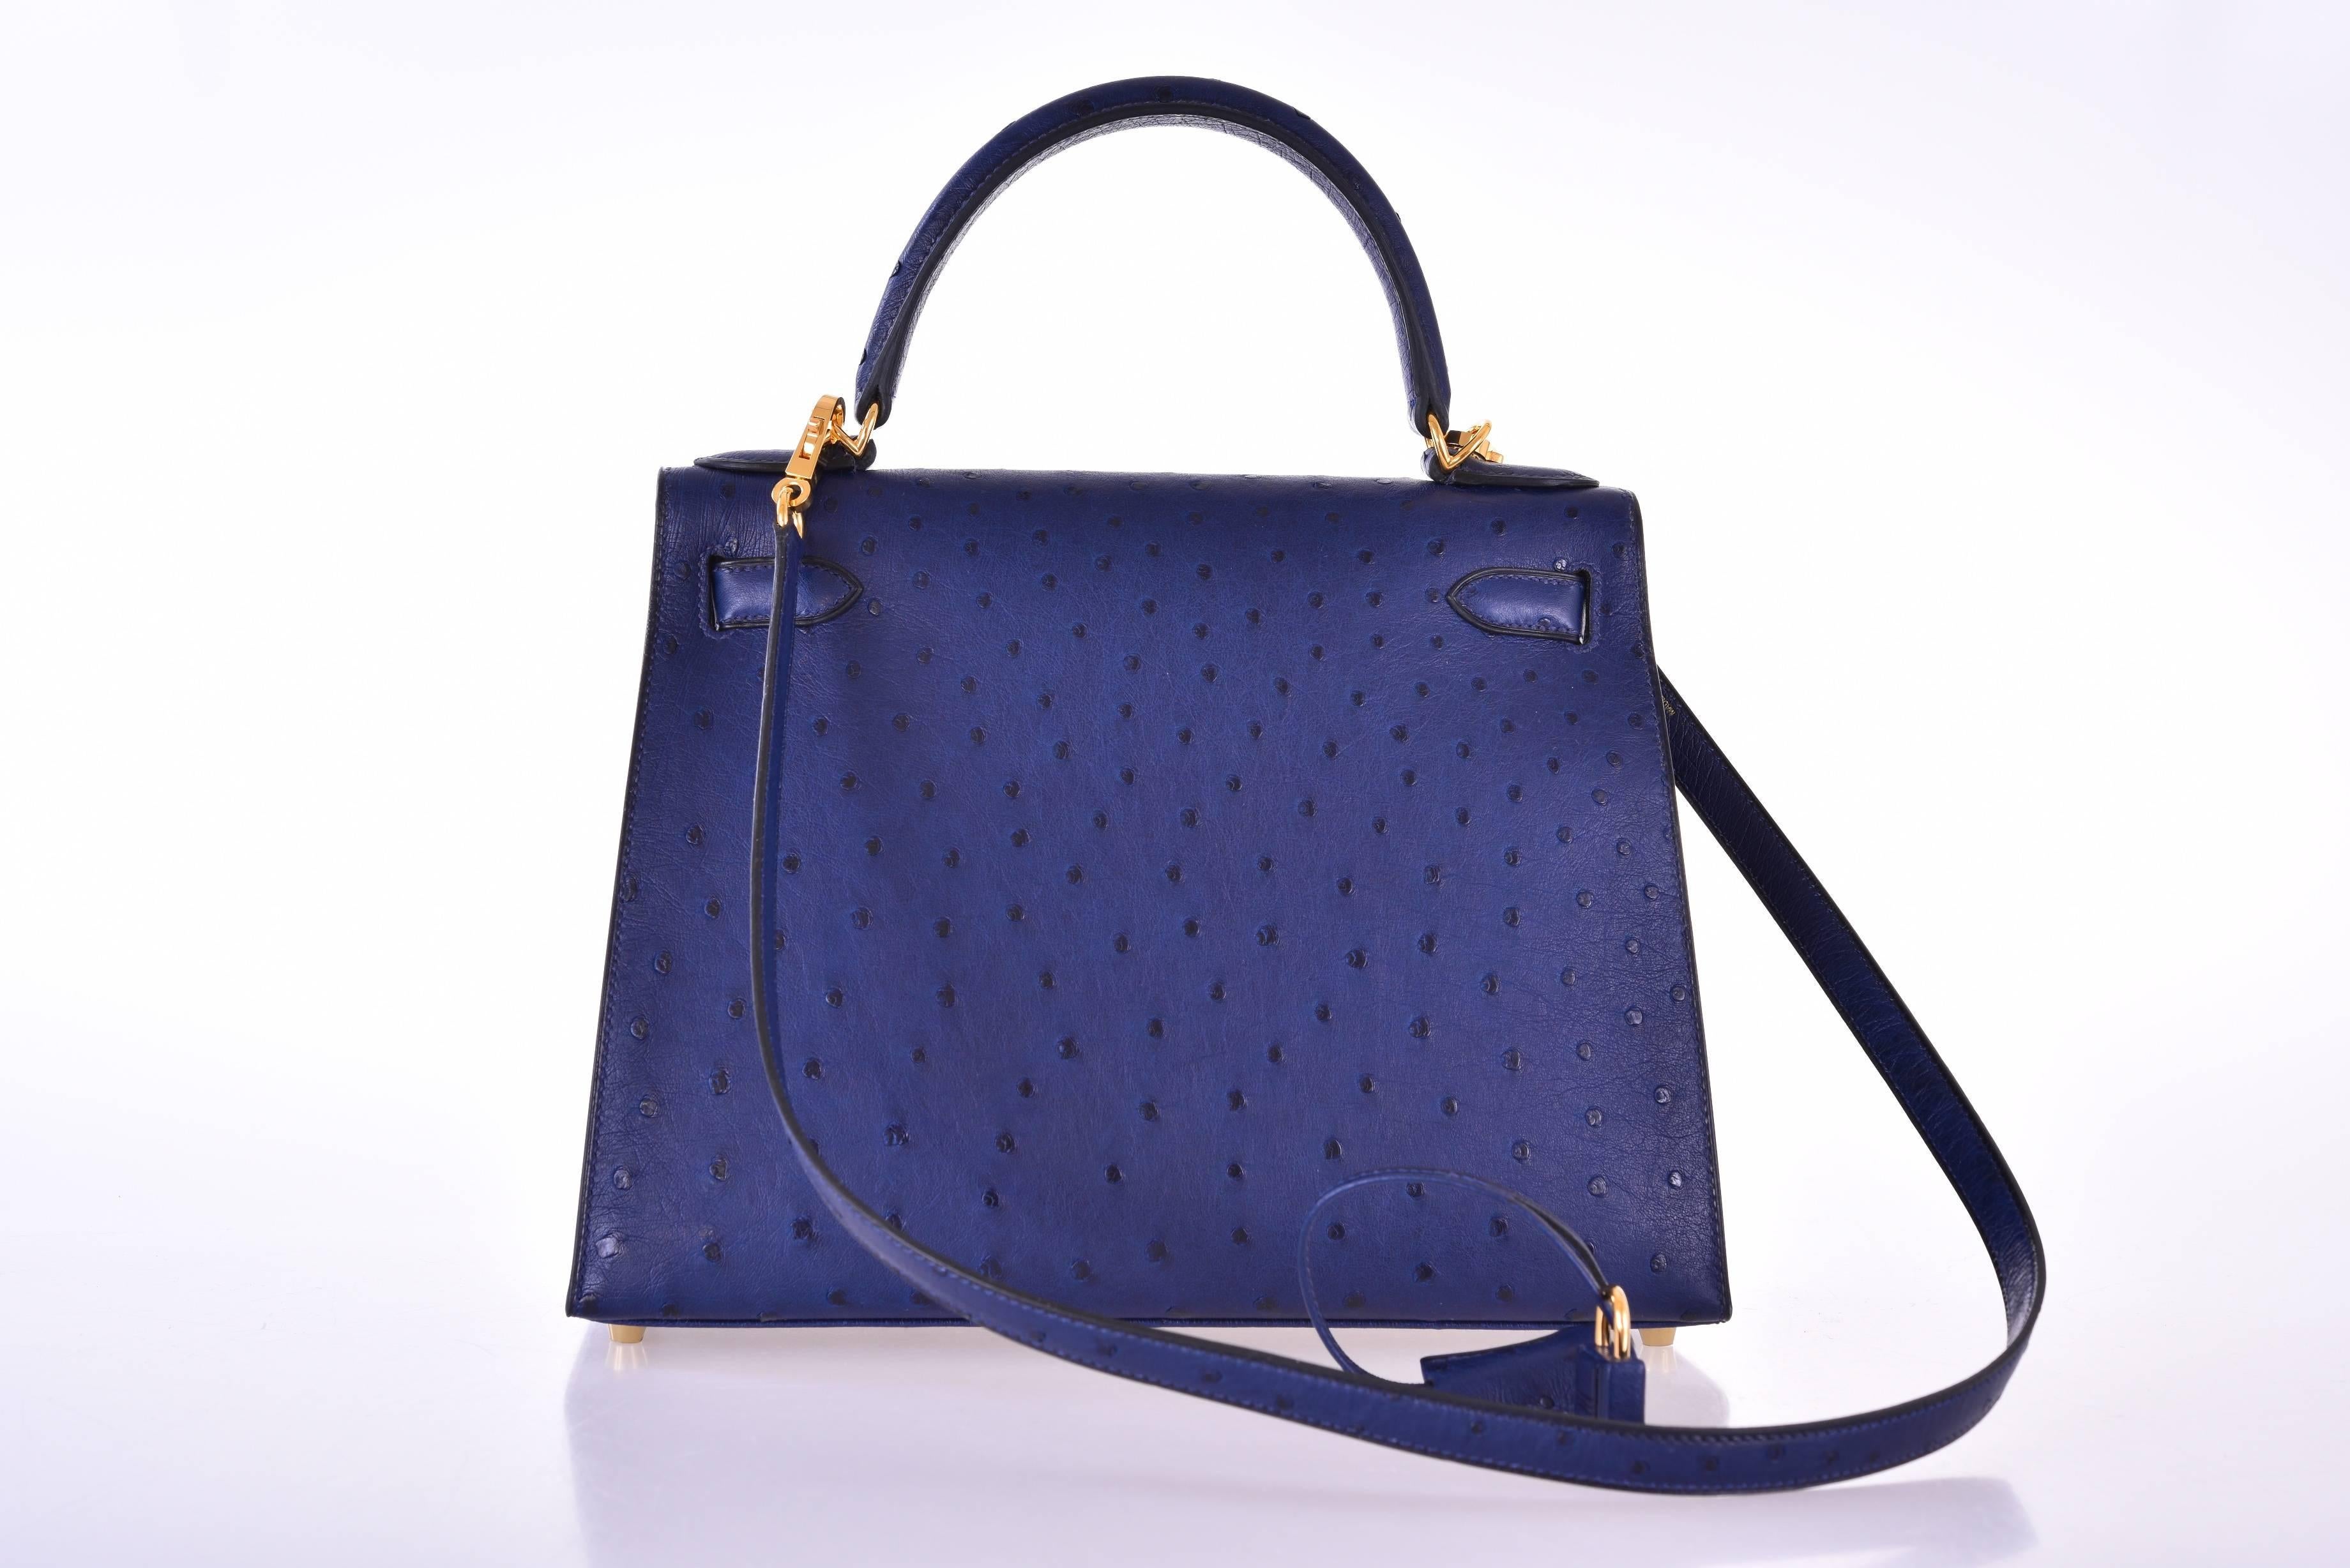 Hermes very special Blue Iris Kelly 28cm with stunning gold hardware. 

New condition 
11" Width x 8" Height x 4” Depth

The color is rich and beautiful blue navy the gold hardware makes the bag pop! 
Interior is ostrich with one zip